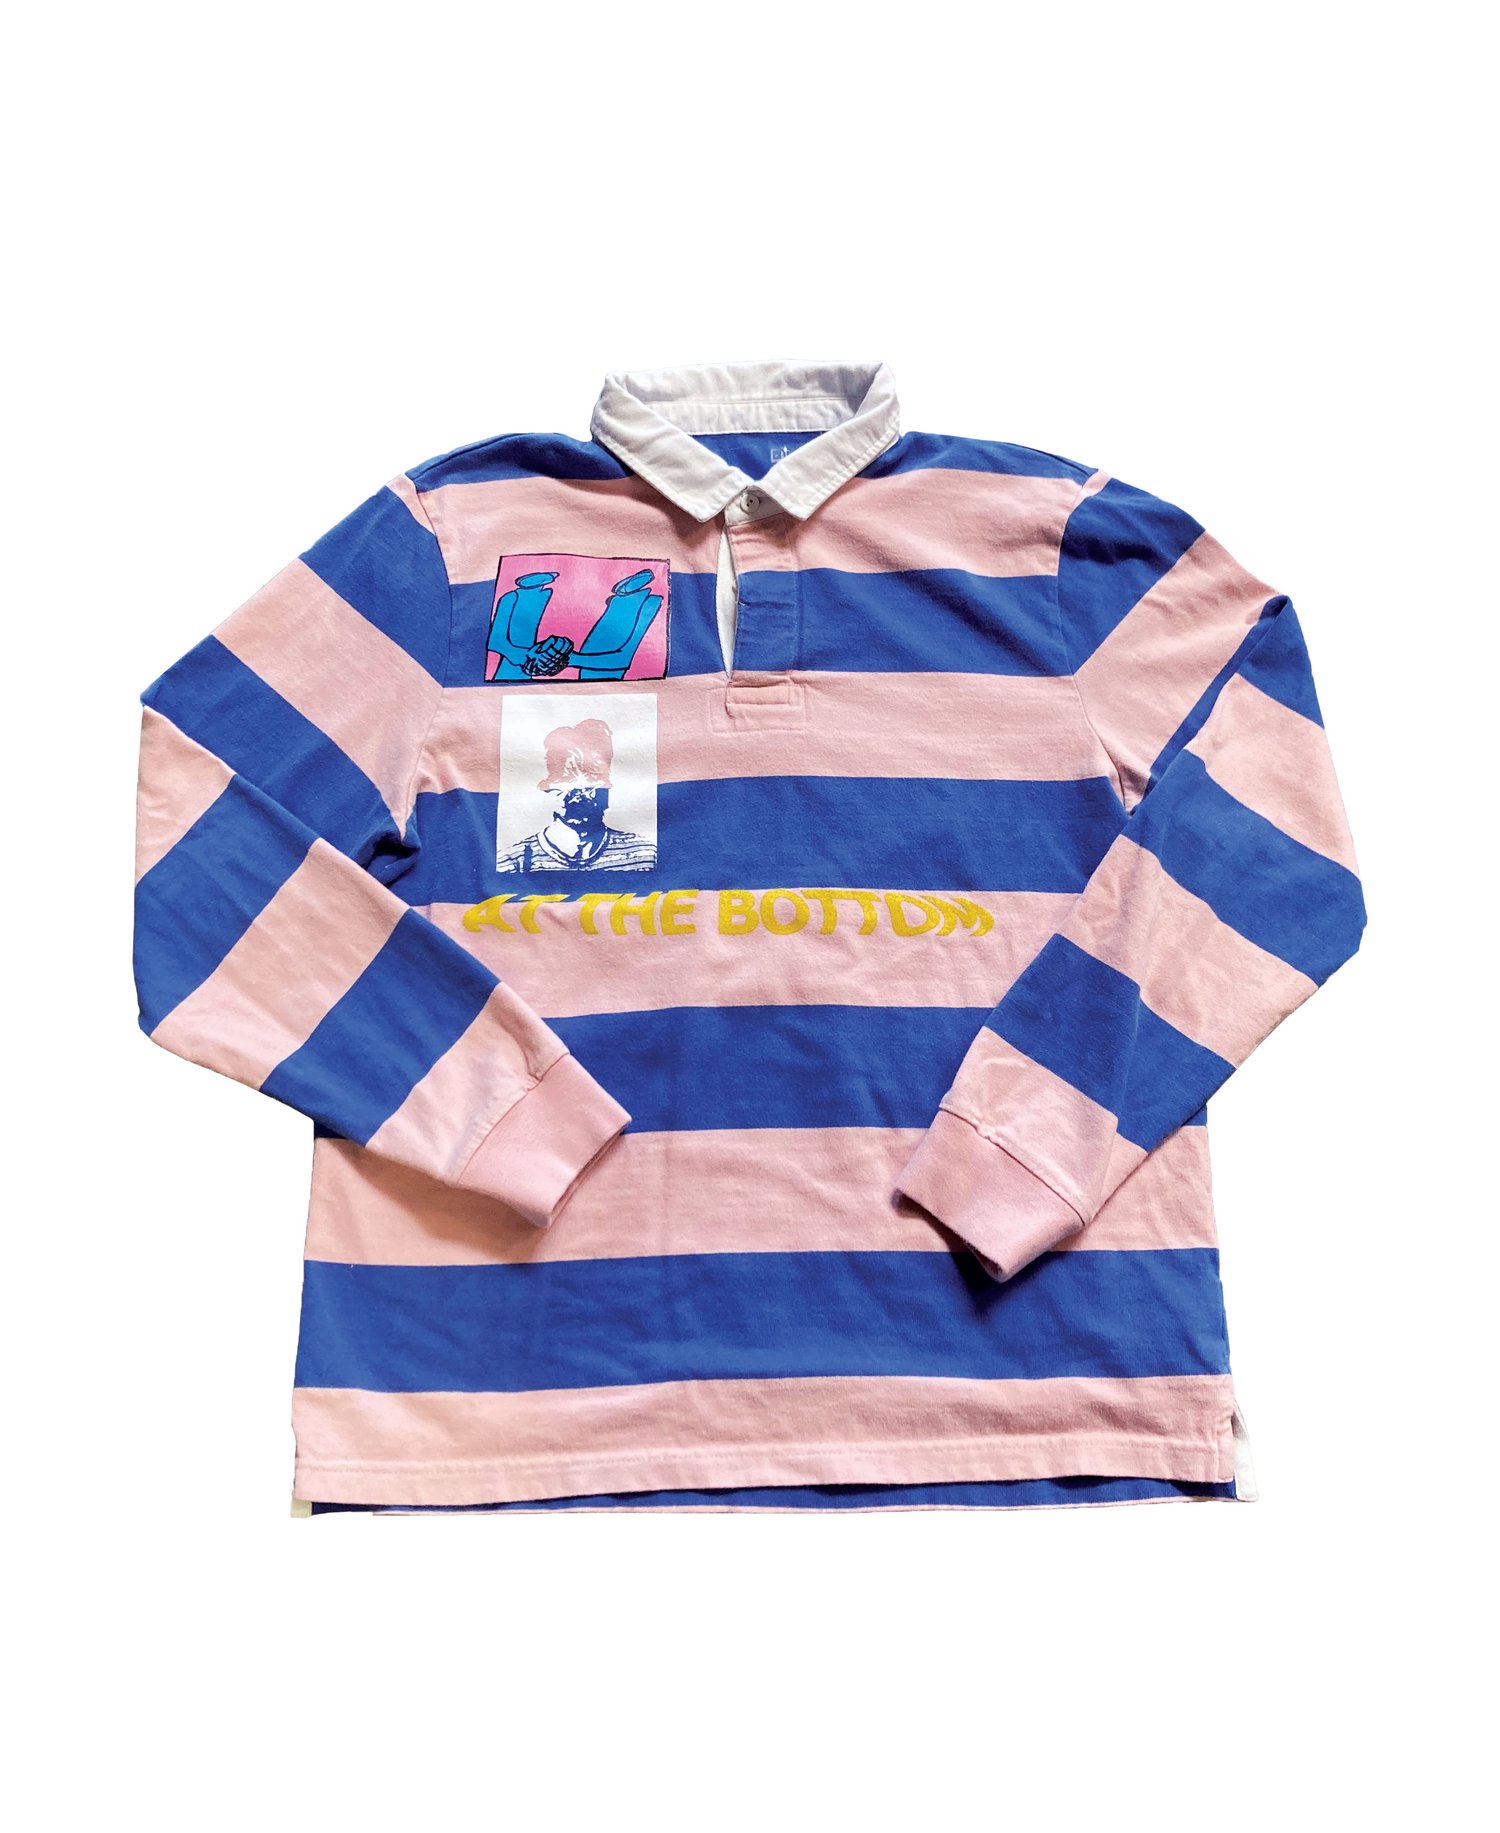 pink/blue striped polo size large